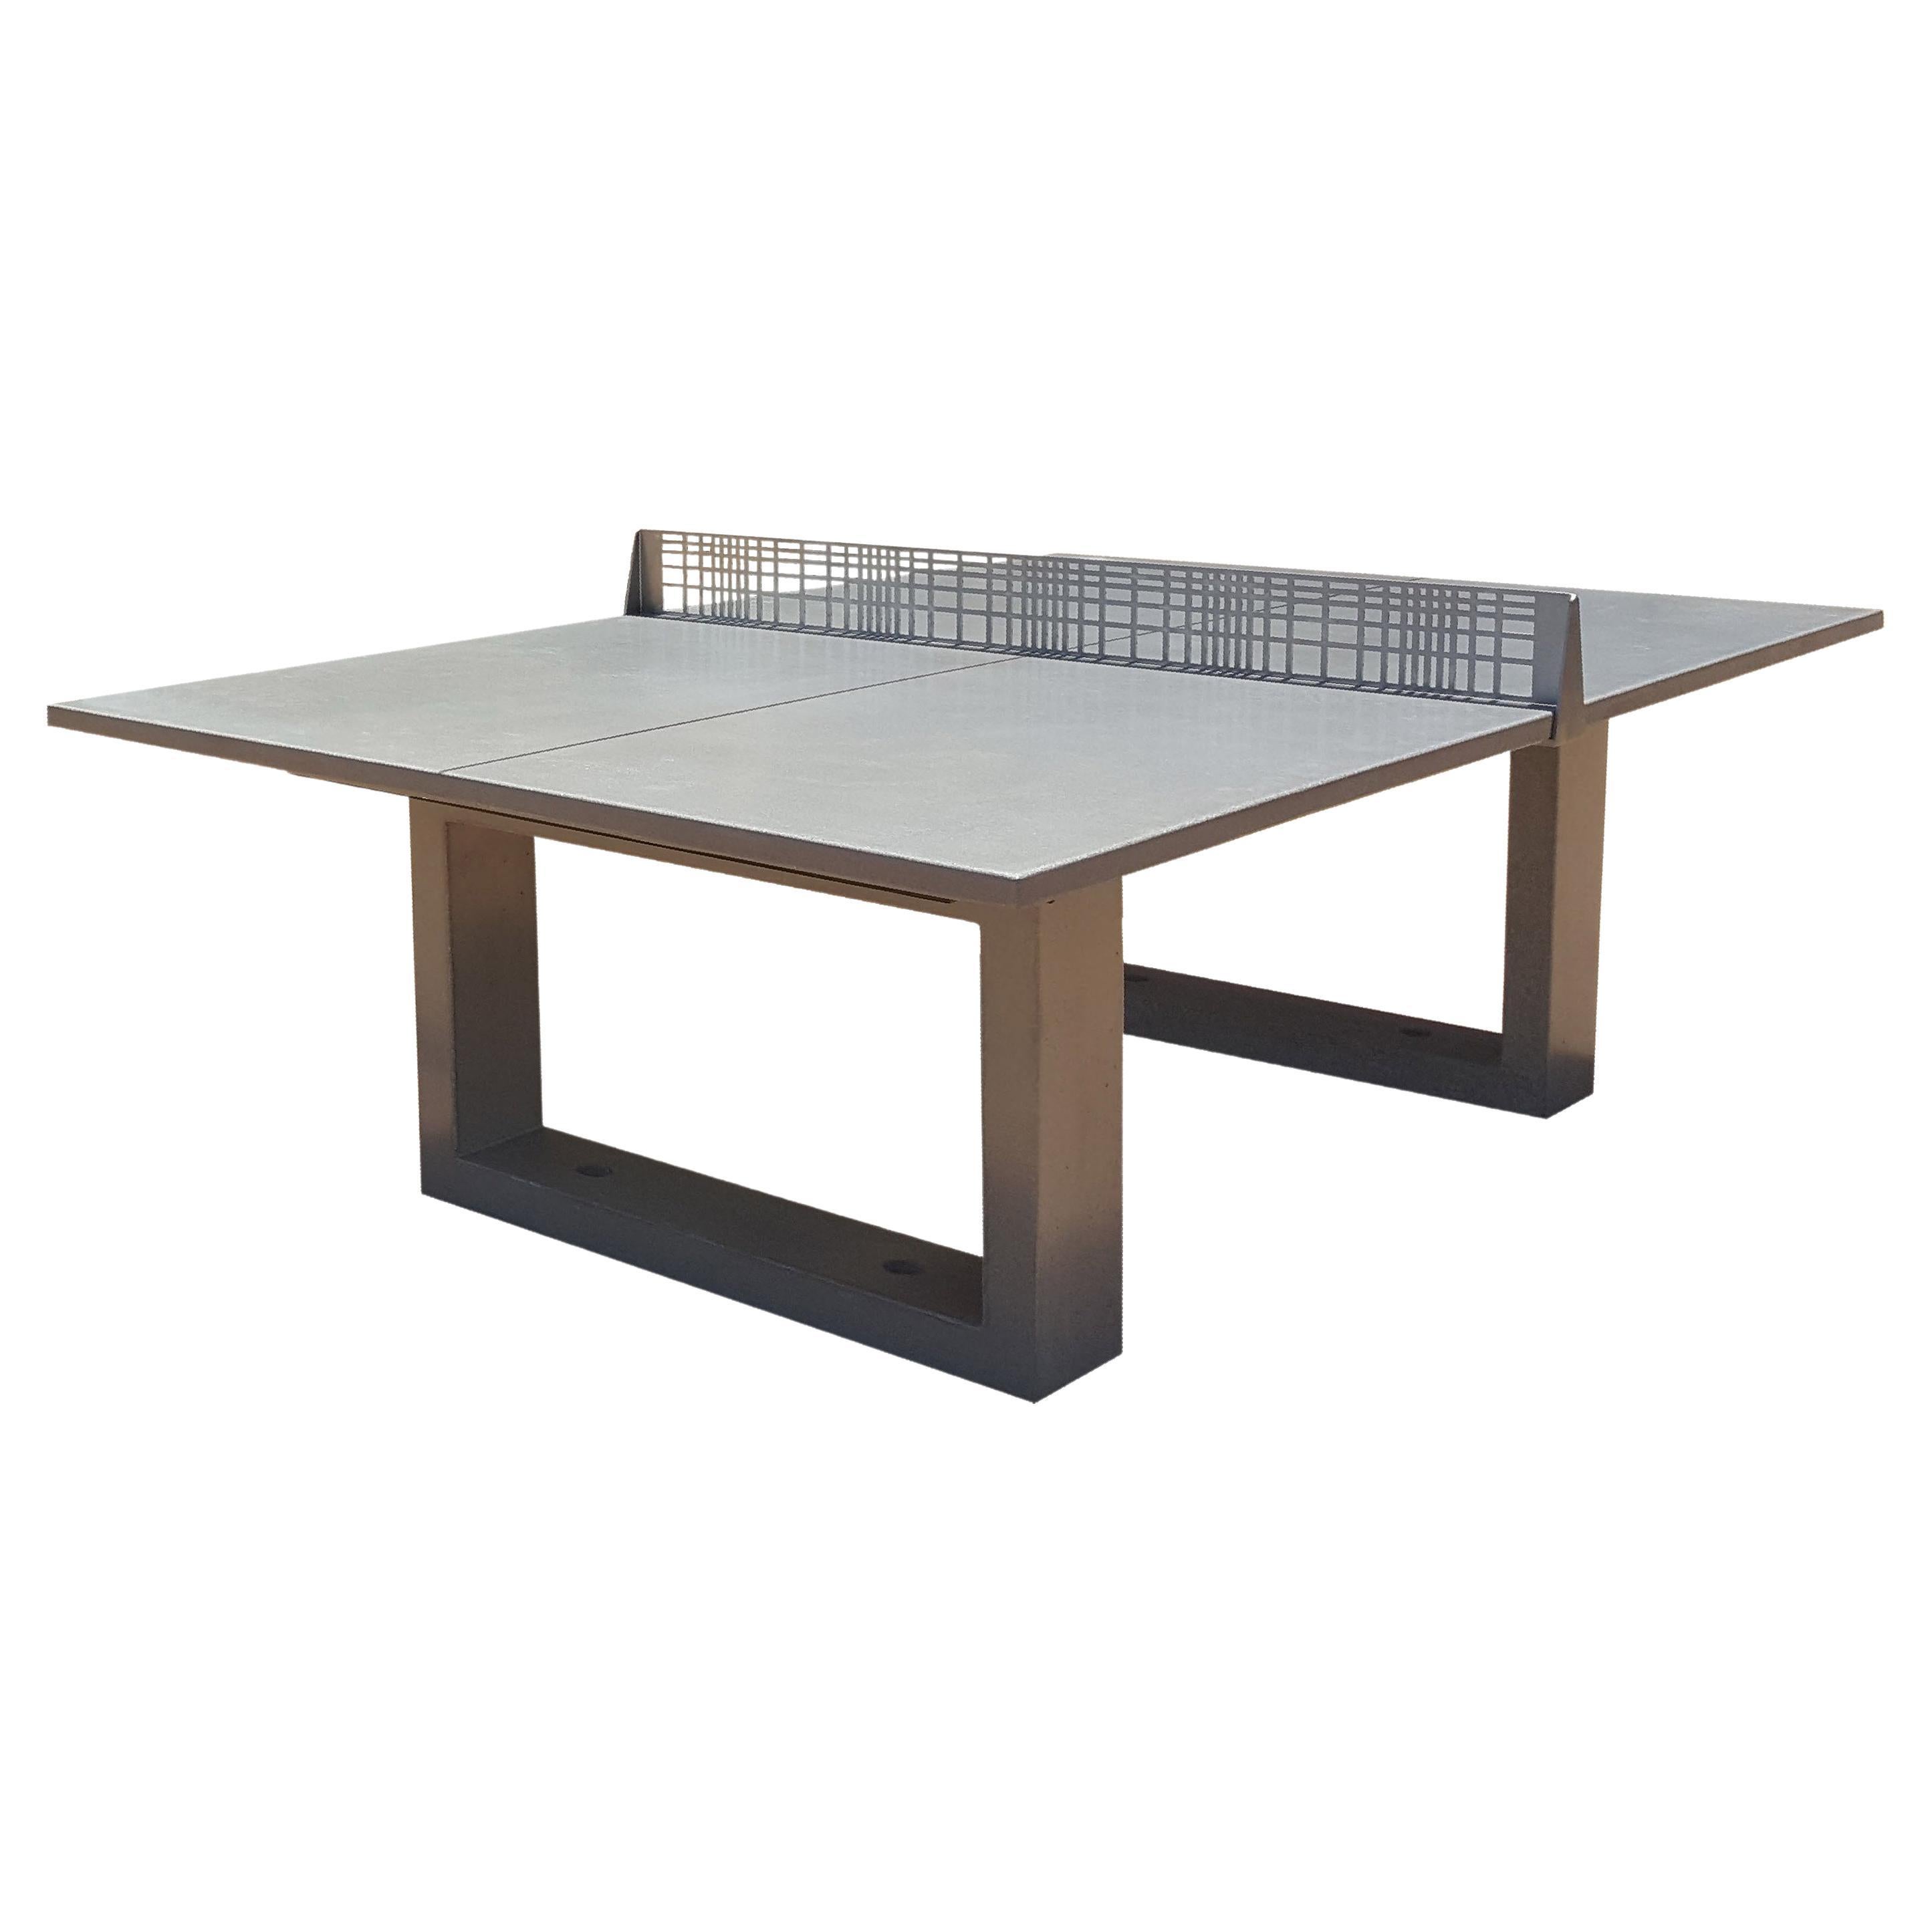 James de Wulf Concrete Ping Pong Table with Stainless Steel Net For Sale